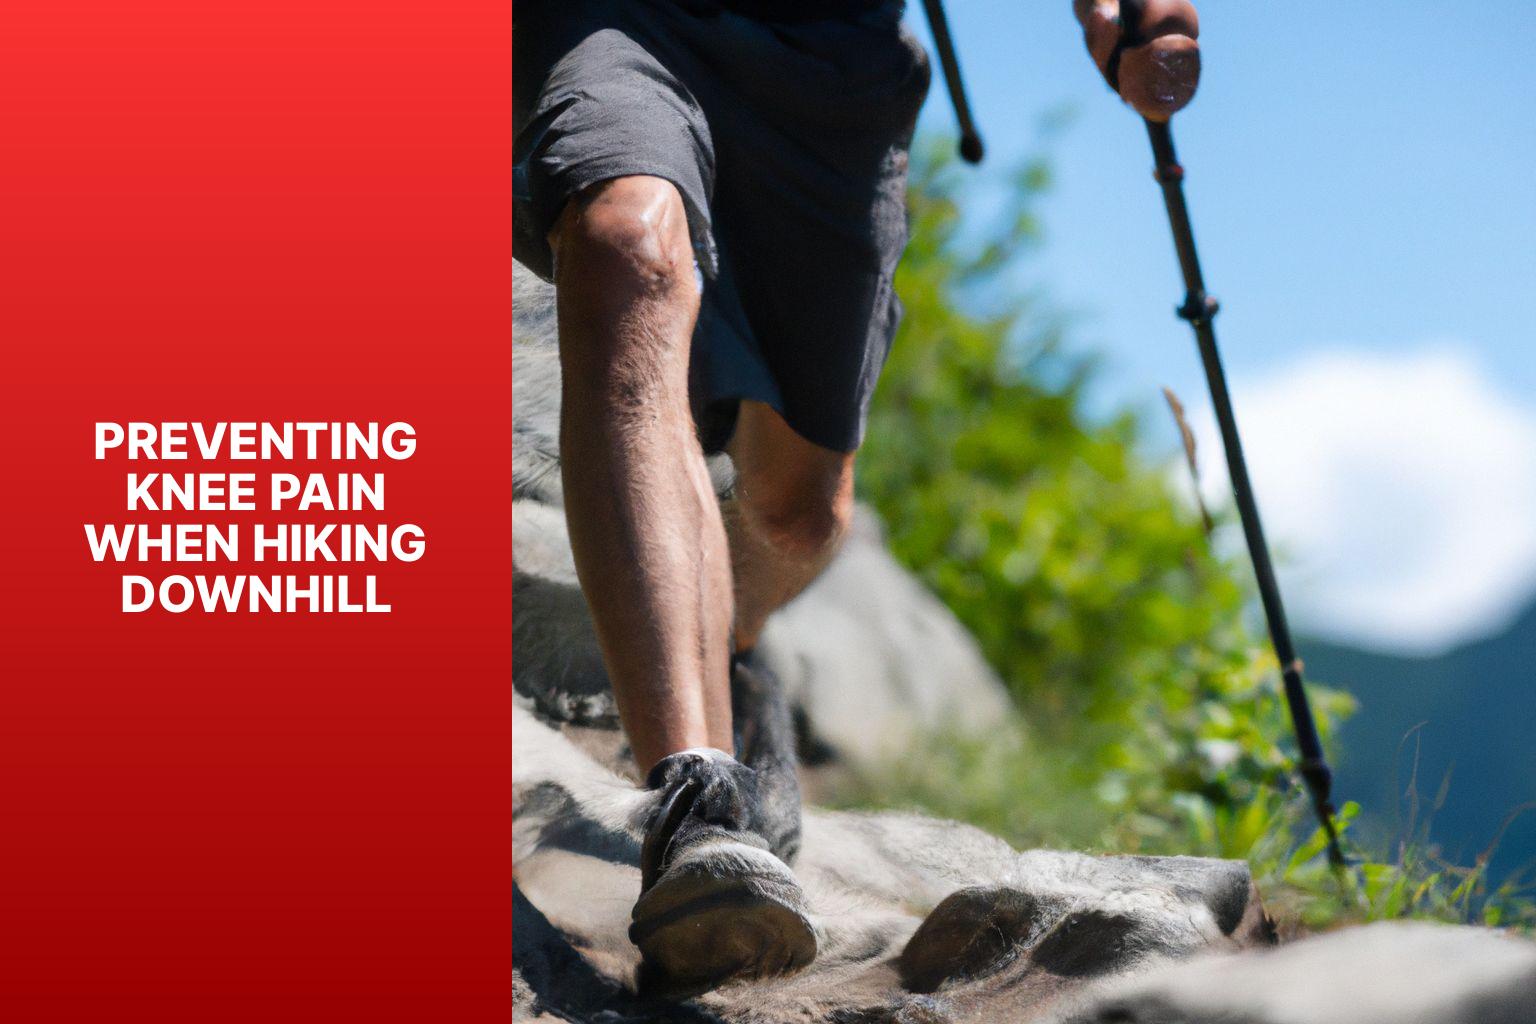 Preventing Knee Pain When Hiking Downhill - Knee Pain When Hiking Downhill 